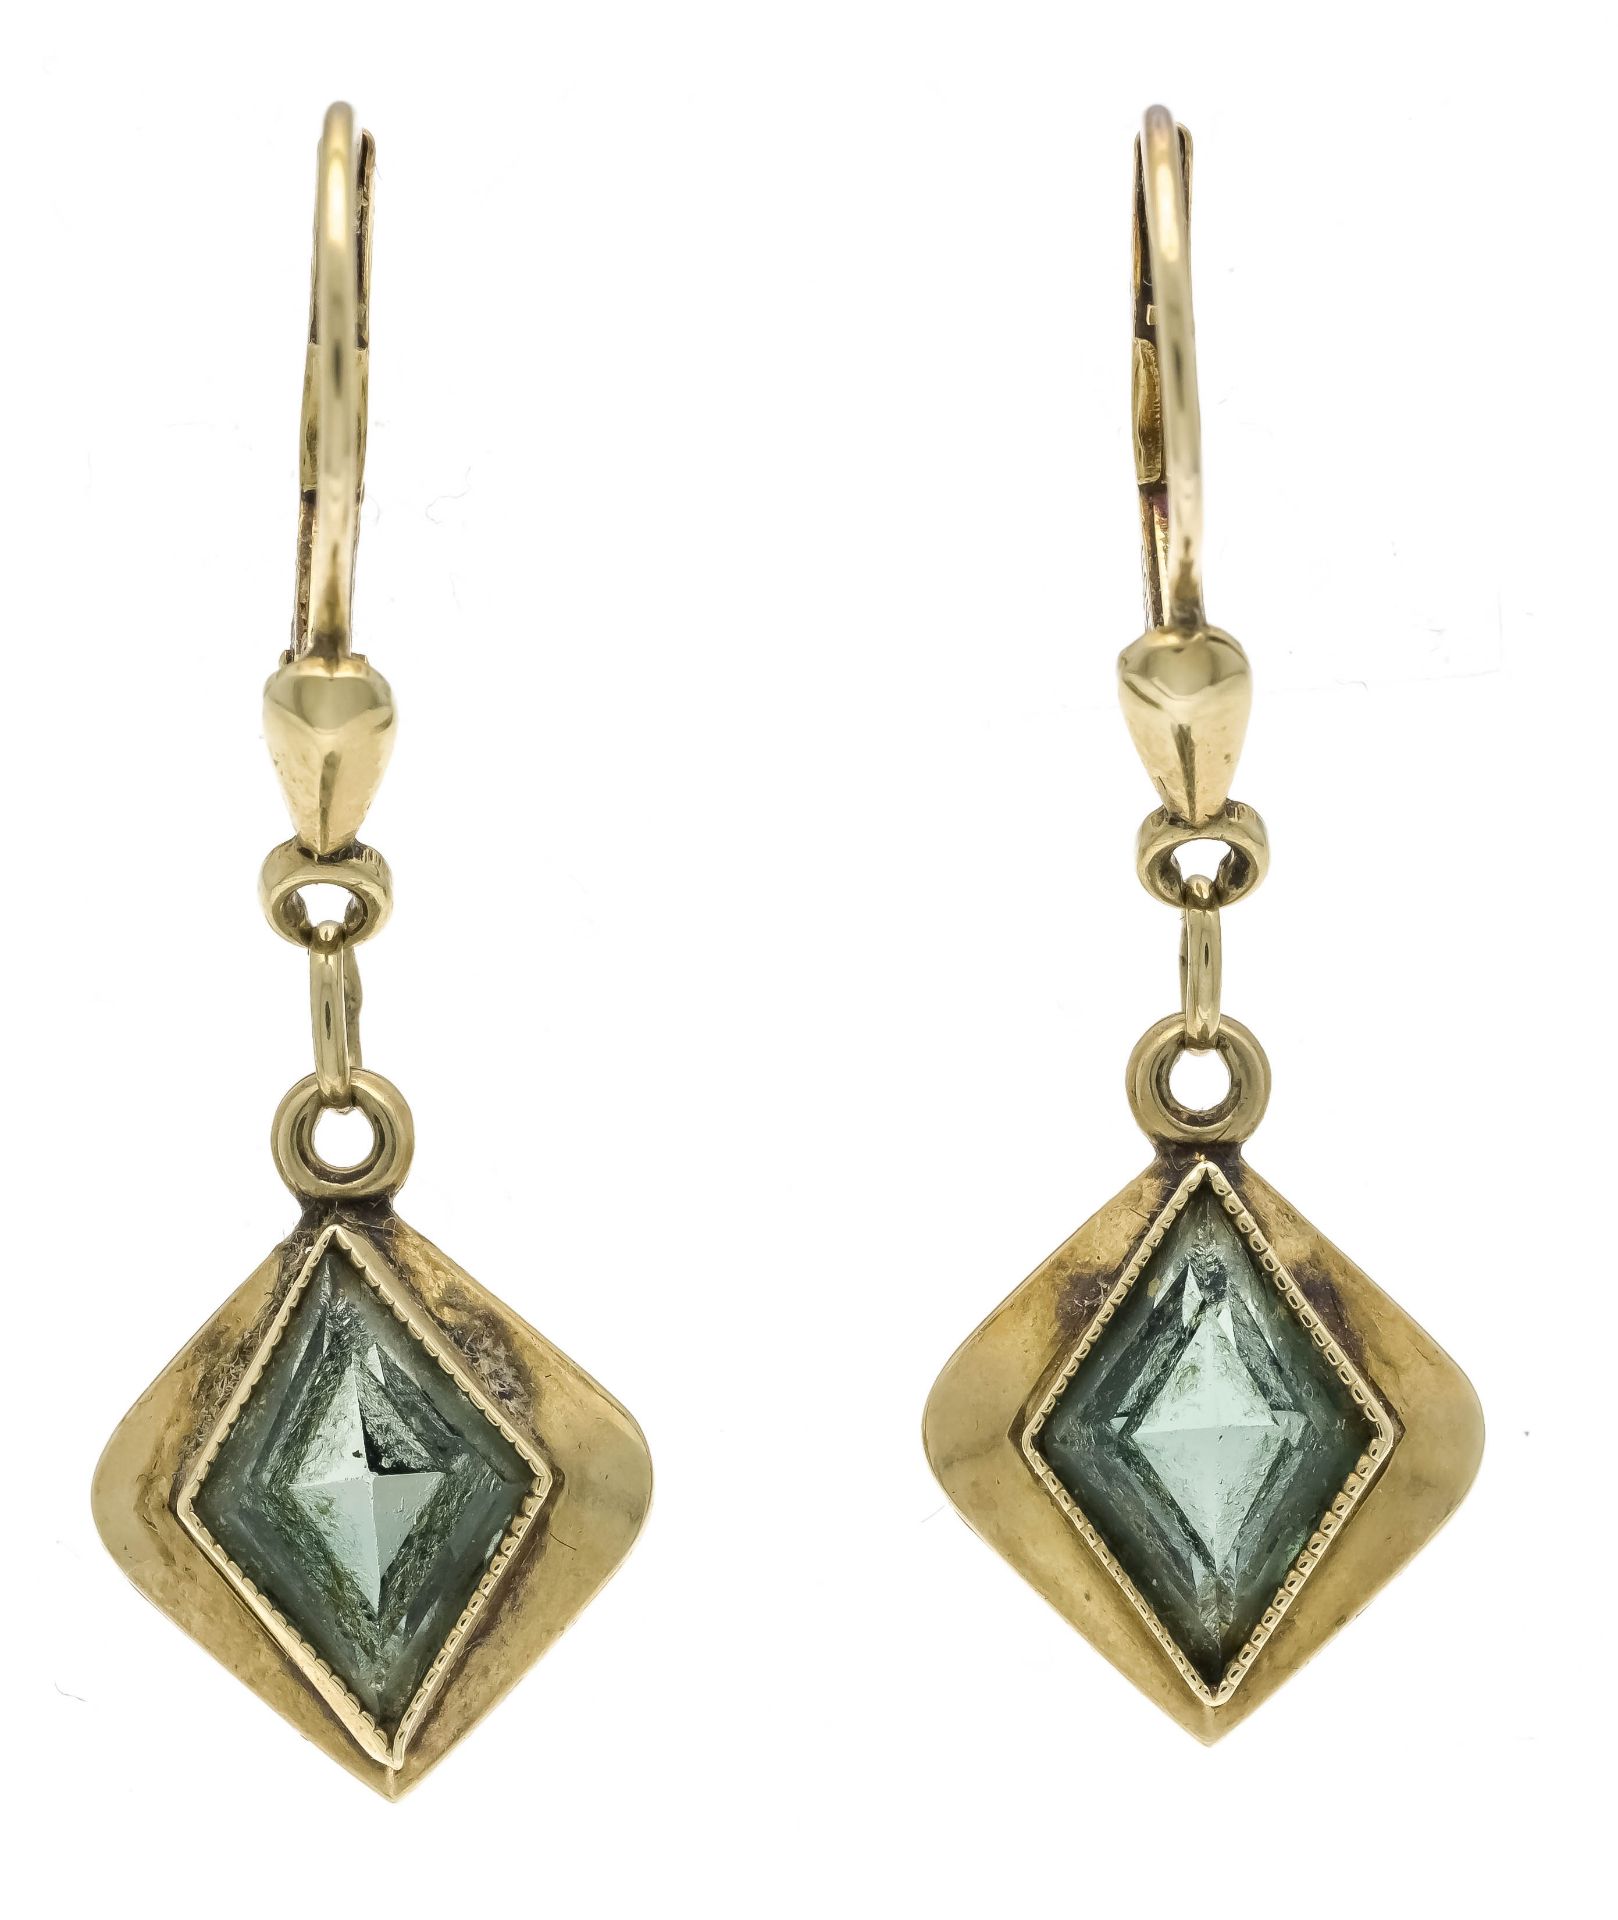 Gemstone earrings GG 585/000 with 2 diamond-shaped faceted green gemstones (probably spinels) 10 x 7